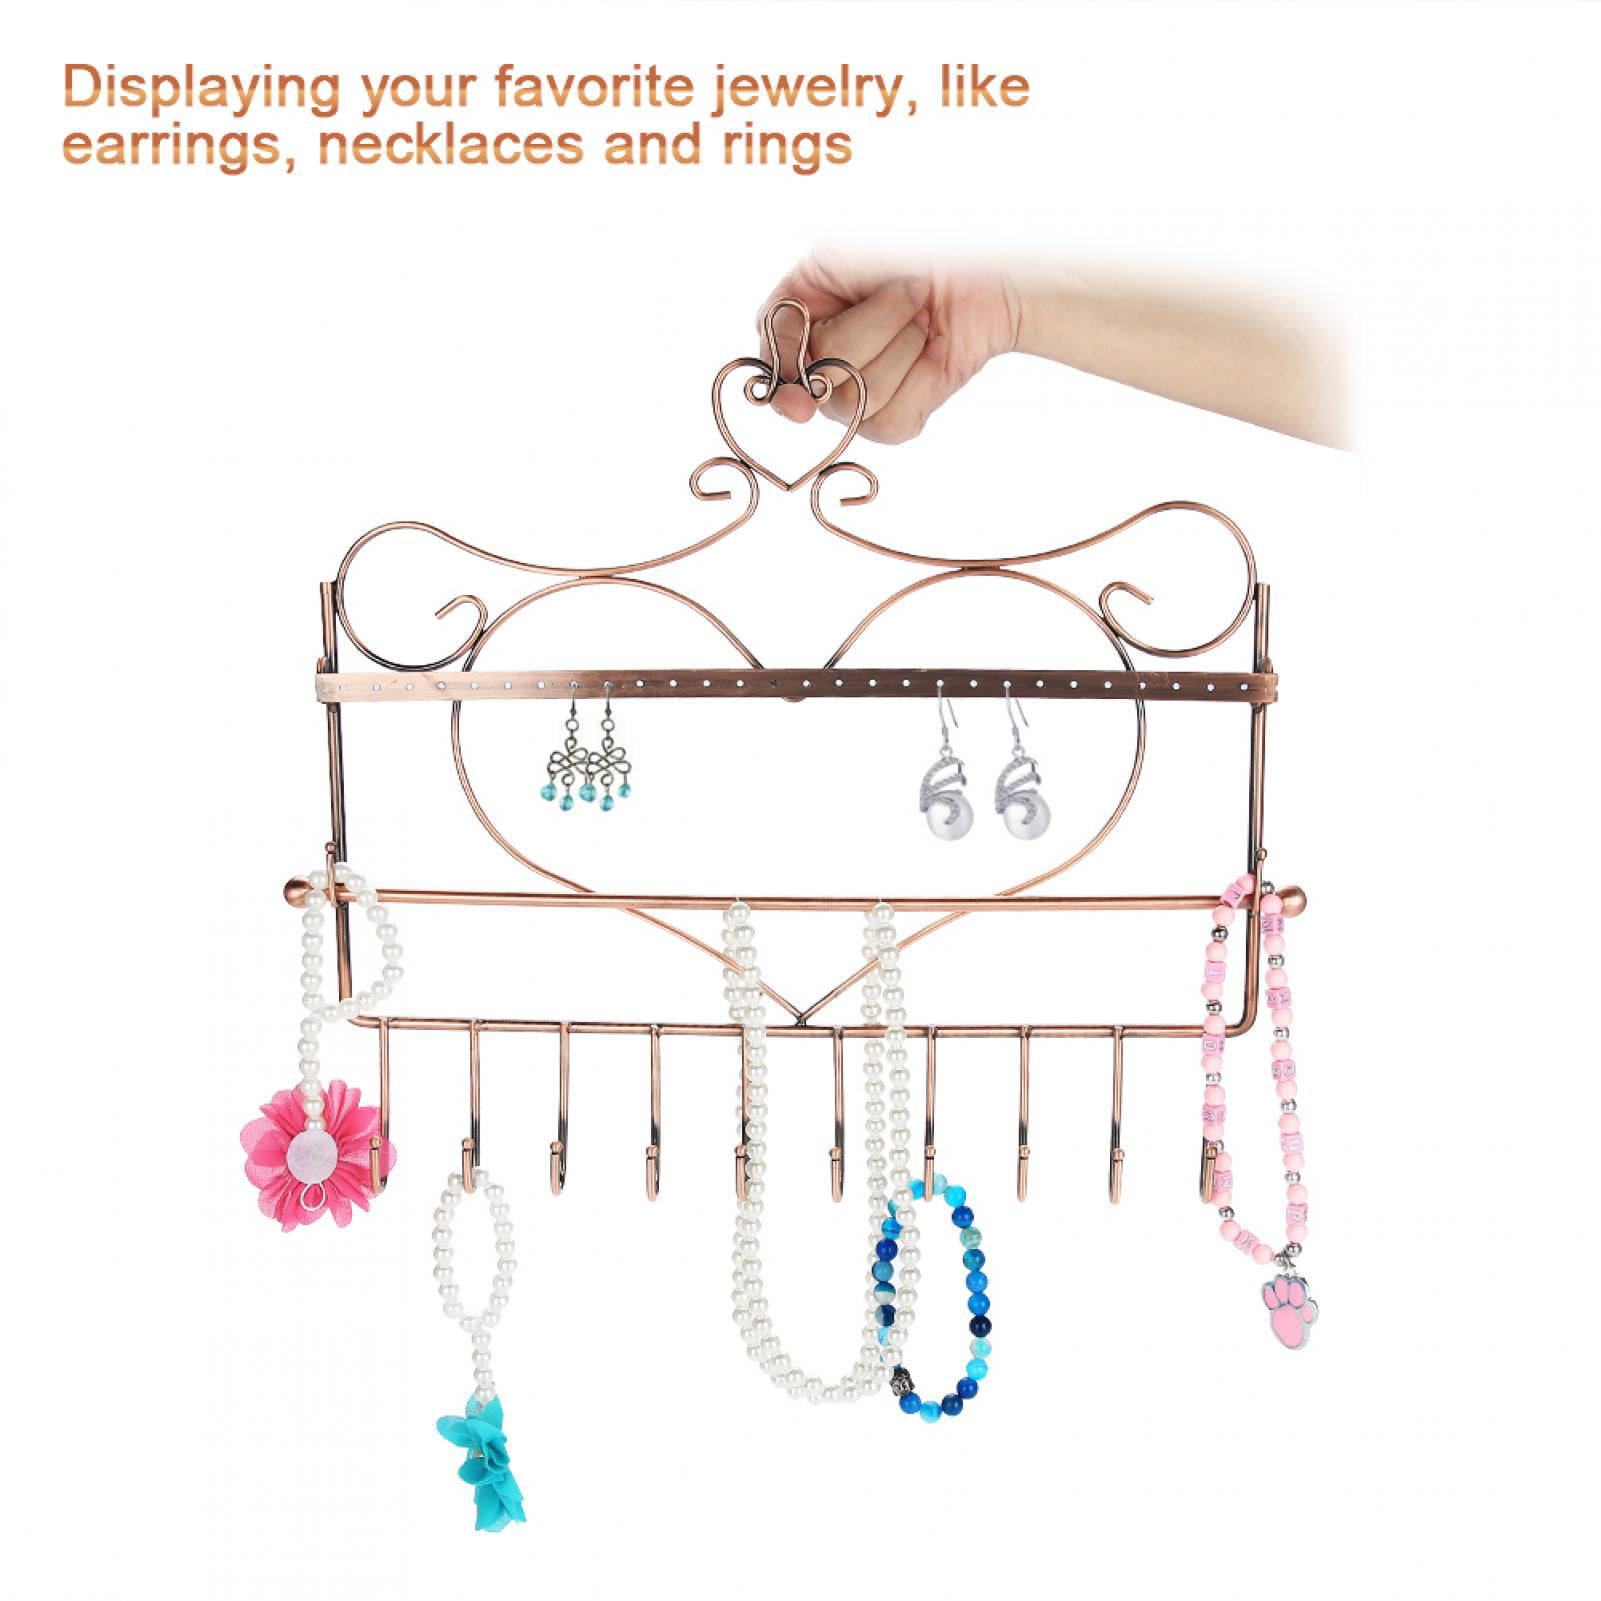 Earring Ear Studs Jewelry Display Stand Wall Type Necklace Organizer Holder Rack 